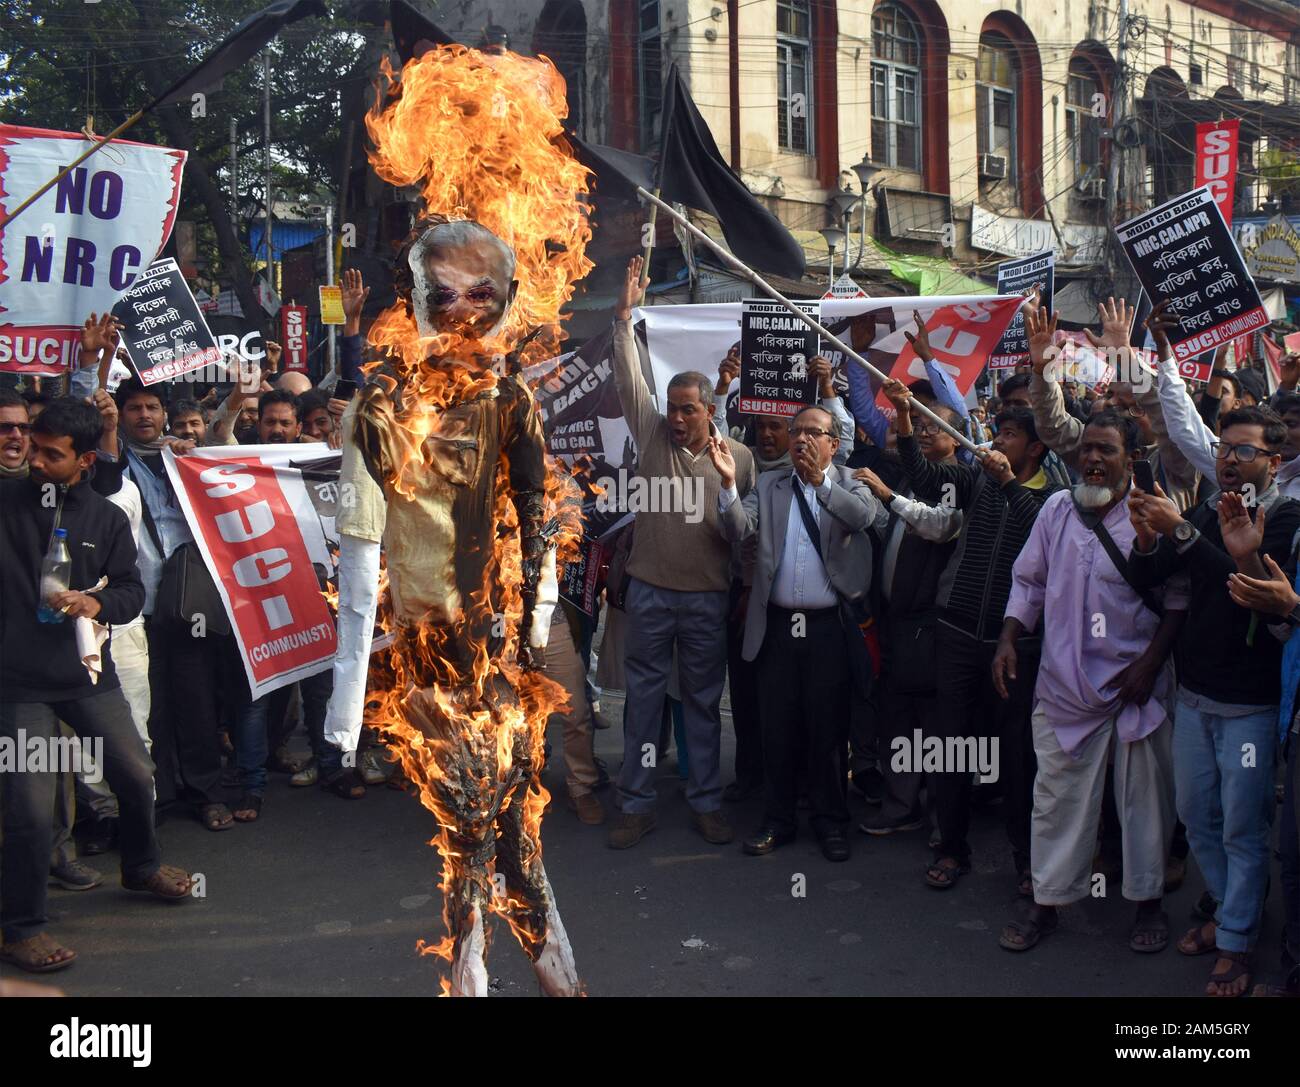 SUCI activists of India shout slogans as they burn an effigy of India's Prime Minister Narendra Modi during a protest rally against the NRC in Kolkata Stock Photo